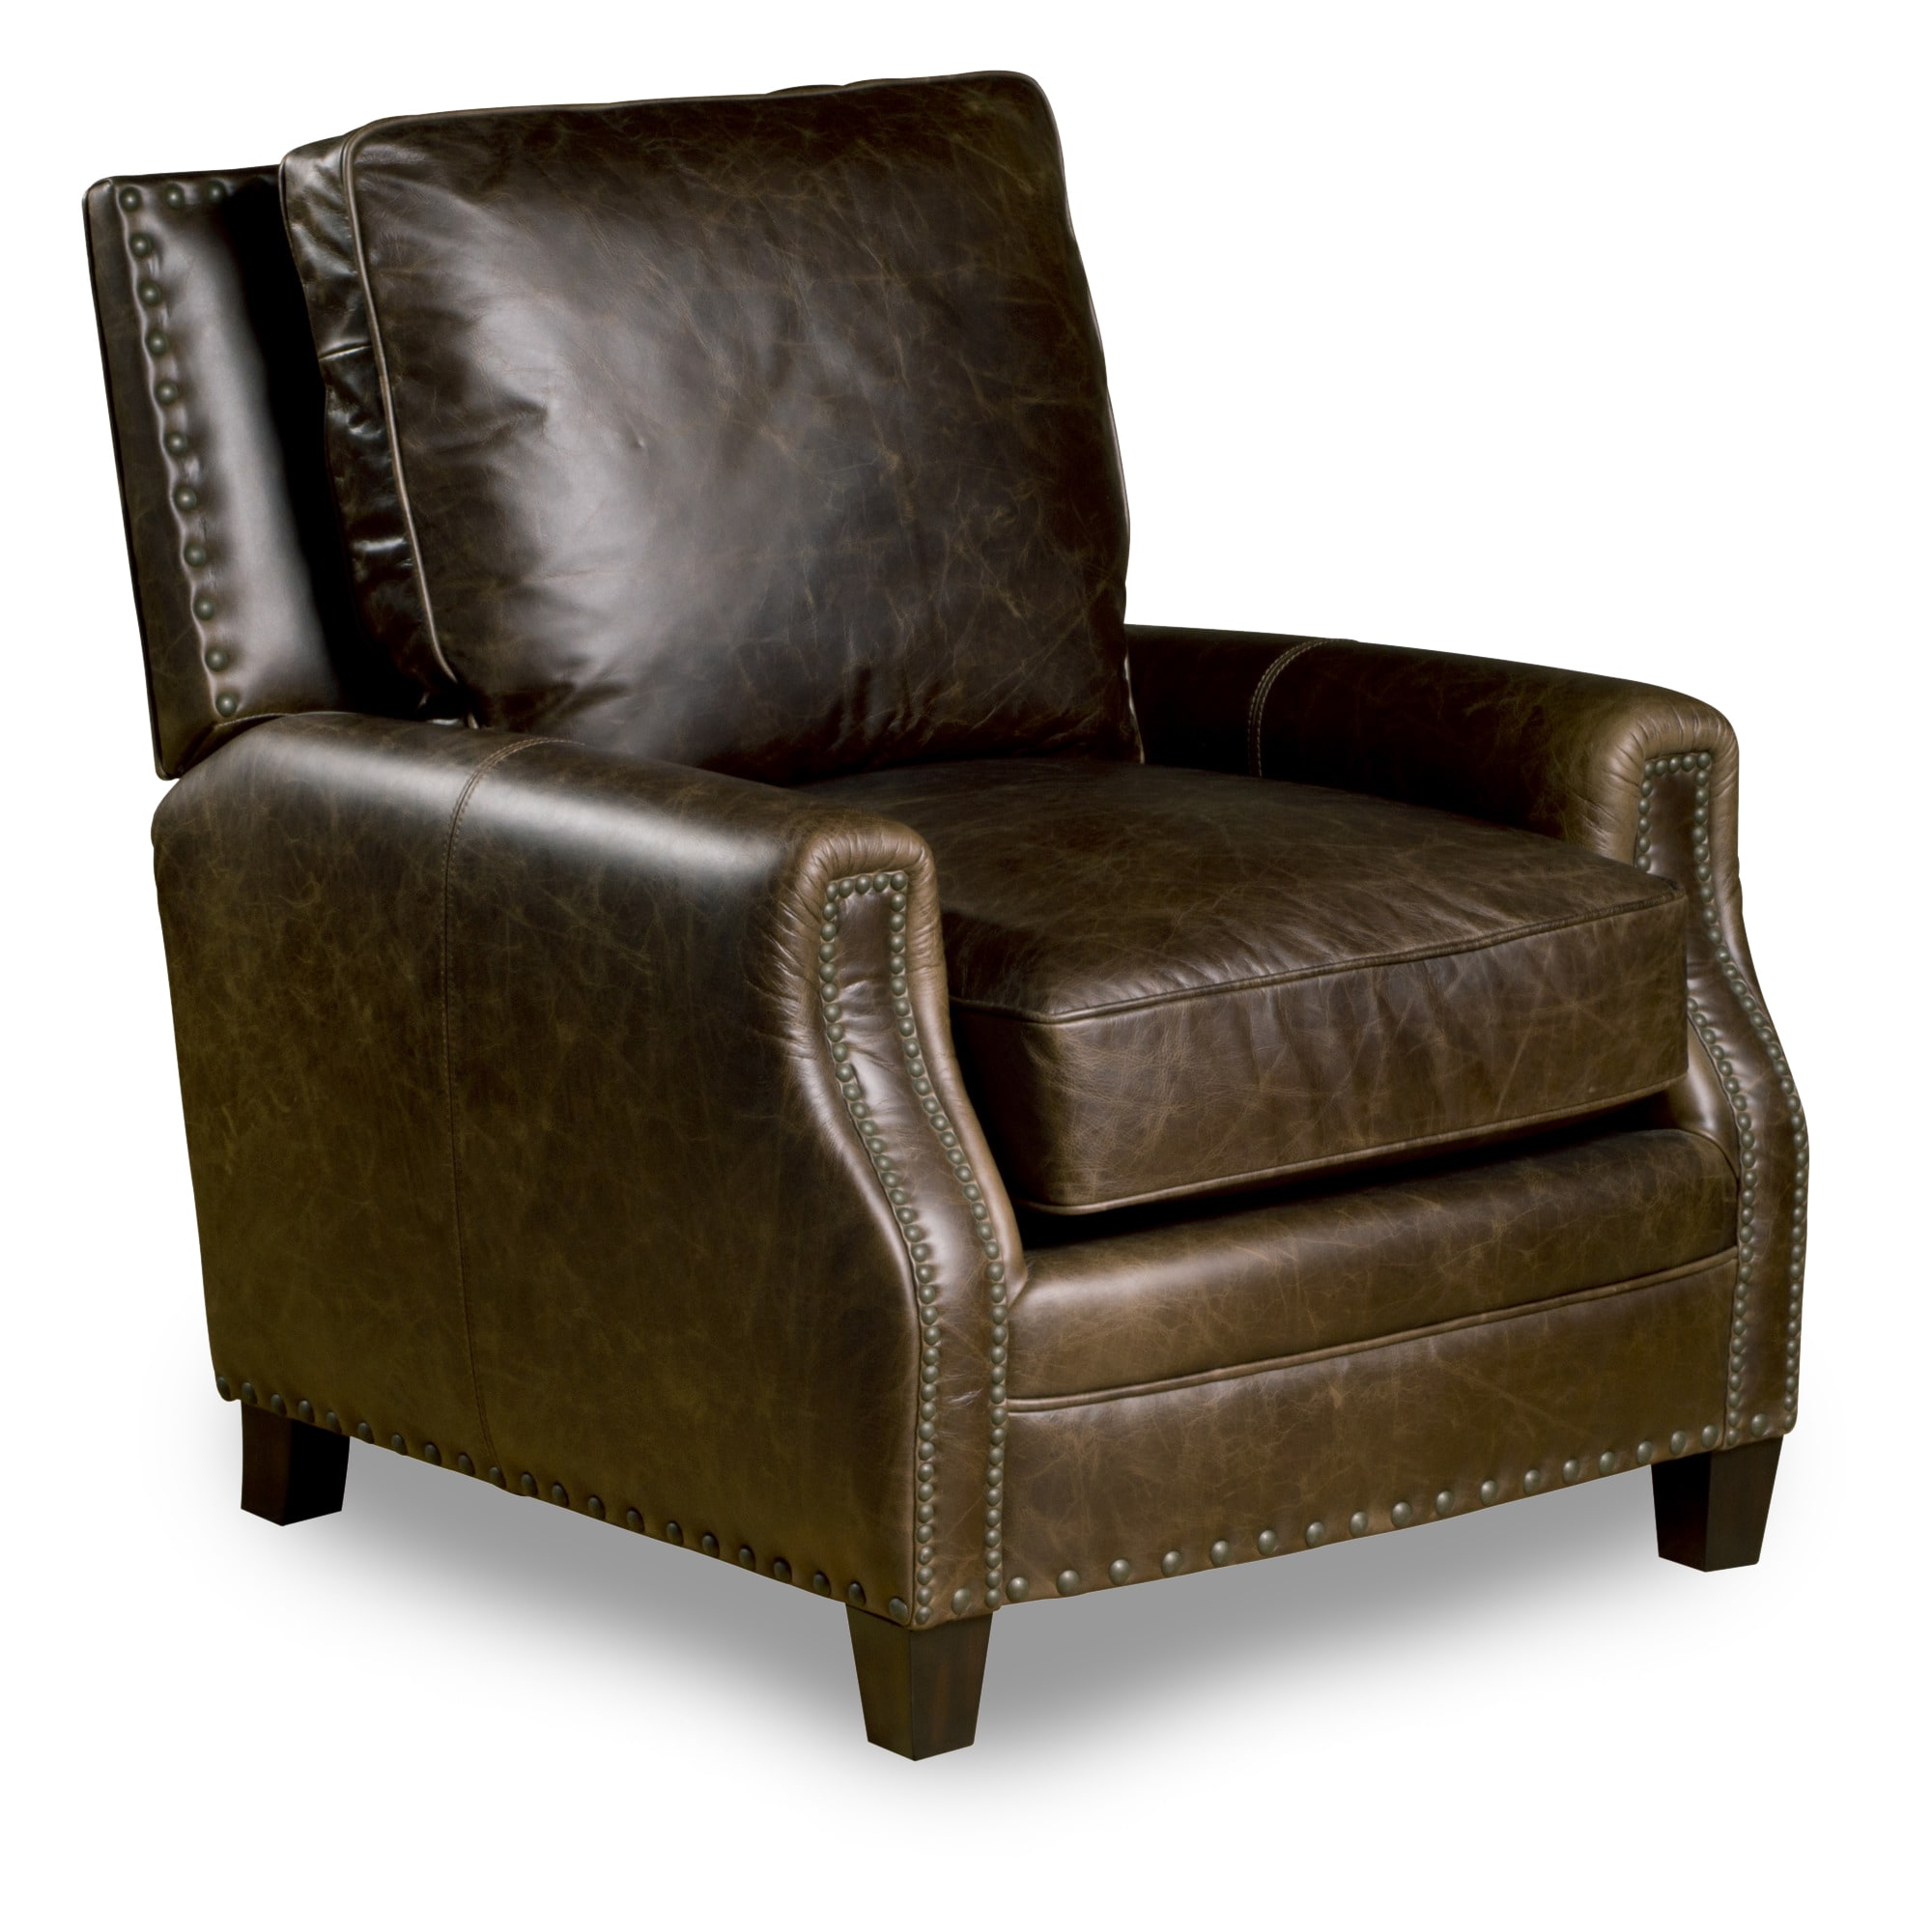 Bradford Leather Chair In Chaps Havana Brown (Chaps Havana BrownSuperior Comfort and Support Hand Applied Antique Brass Nail Head Trim in Two SizesRobust Frame of Solid Hardwoods and Marine Grade Plywood, key Joints Reinforced with Corner BlocksDurable St